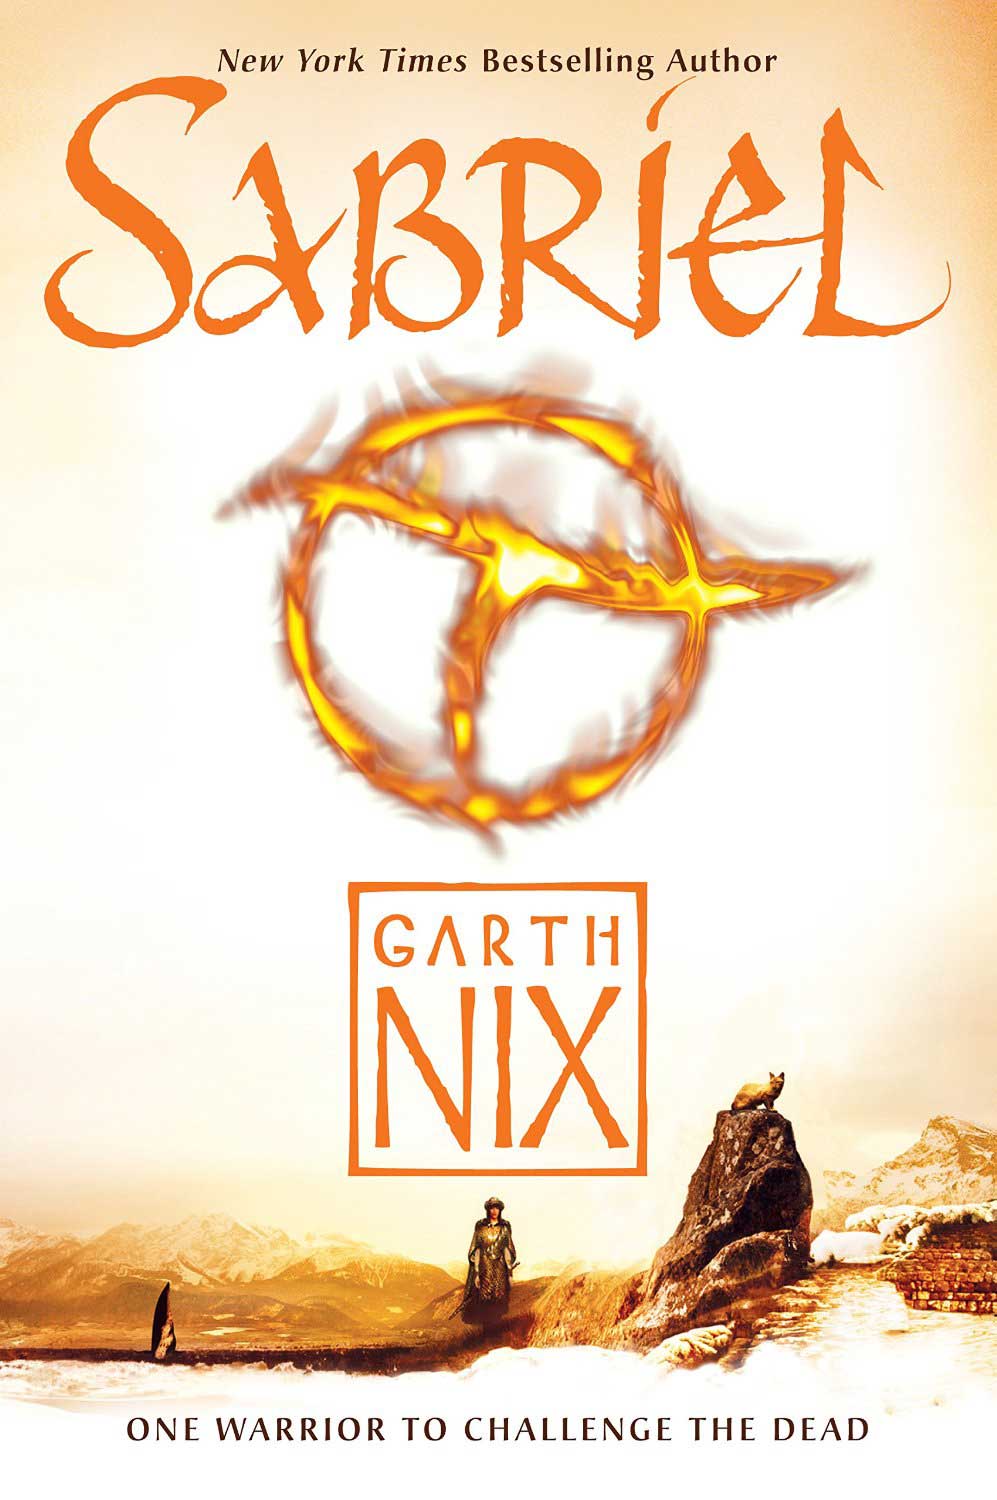 Sabriel, by Garth Nix.
                              
                              
                              
                              Sabriel travels into the depth of the mystical Old Kingdom to save her father, where she confronts a dark world of spirits and the undead.
                              
                              
                              
                              Buy now: Sabriel